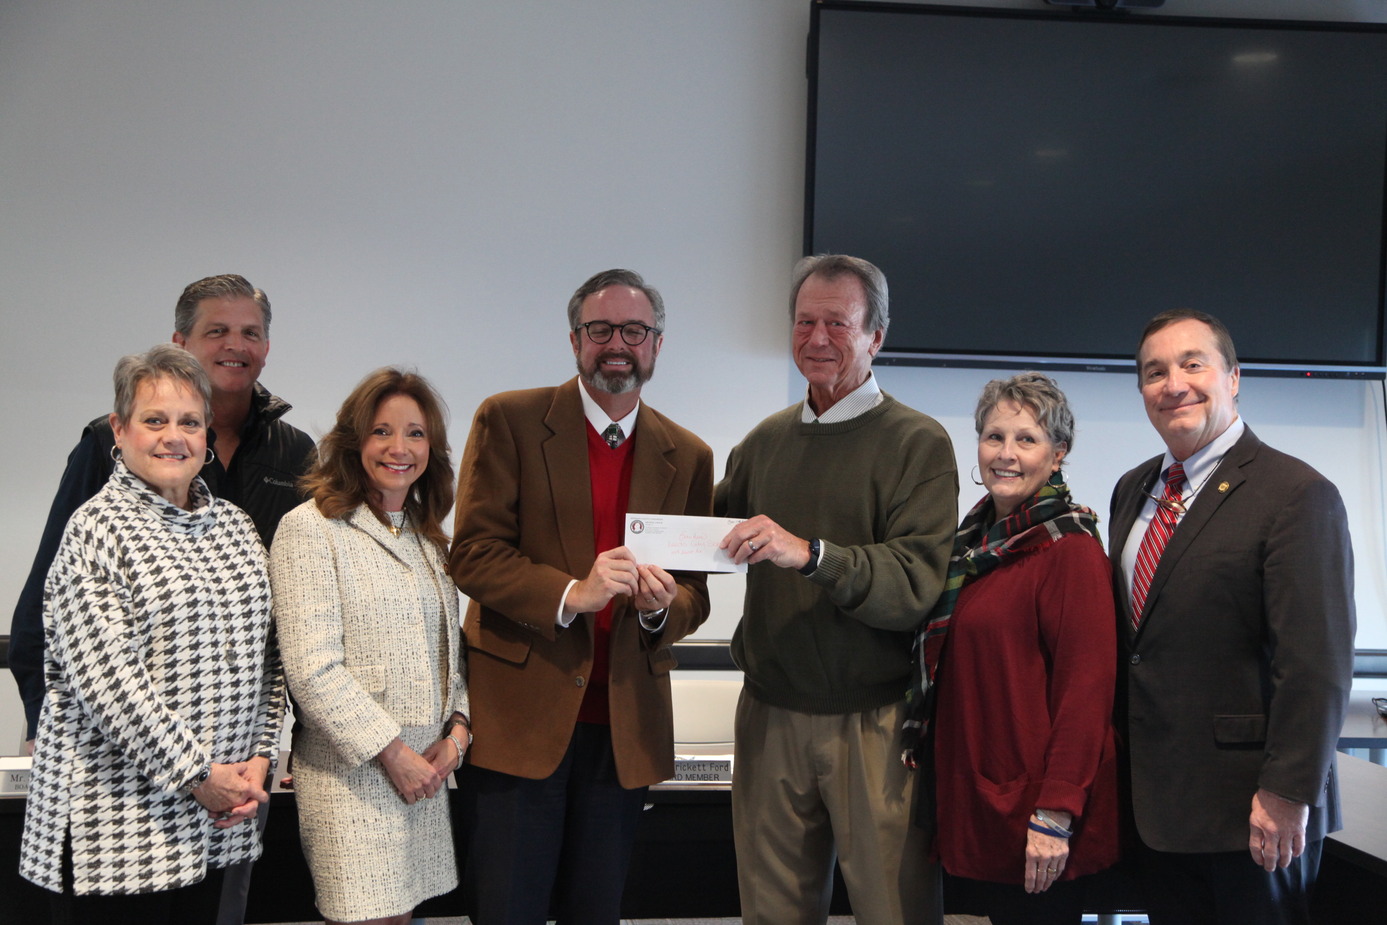 Leeds Board of Education presented check by county commission for athletic facility project